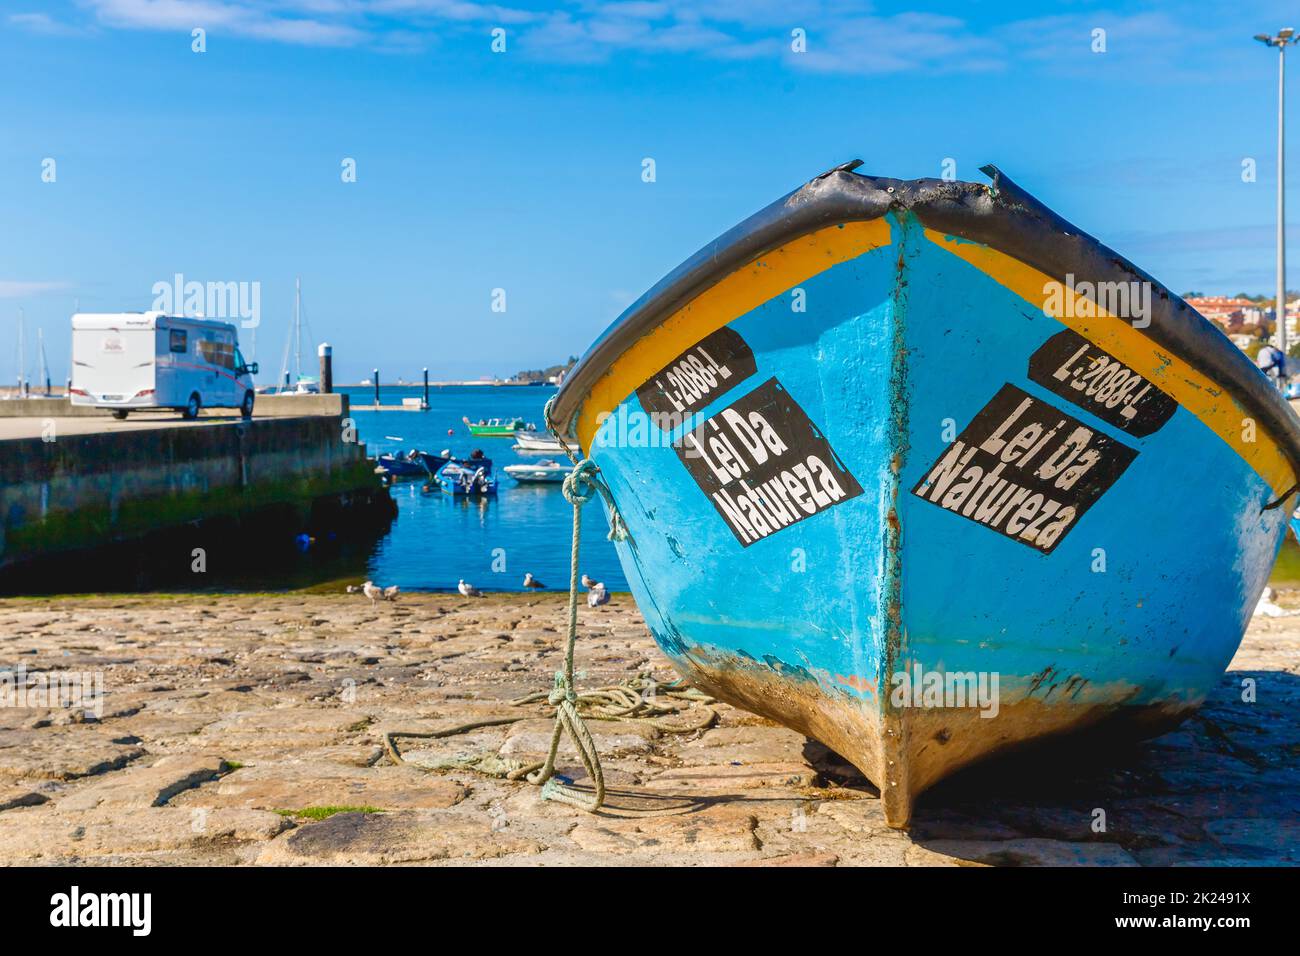 Porto, Portugal - October 23, 2020: Small fishing boats in the fishing port of Afurada at the exit of the mouth of the Douro river on an autumn day Stock Photo